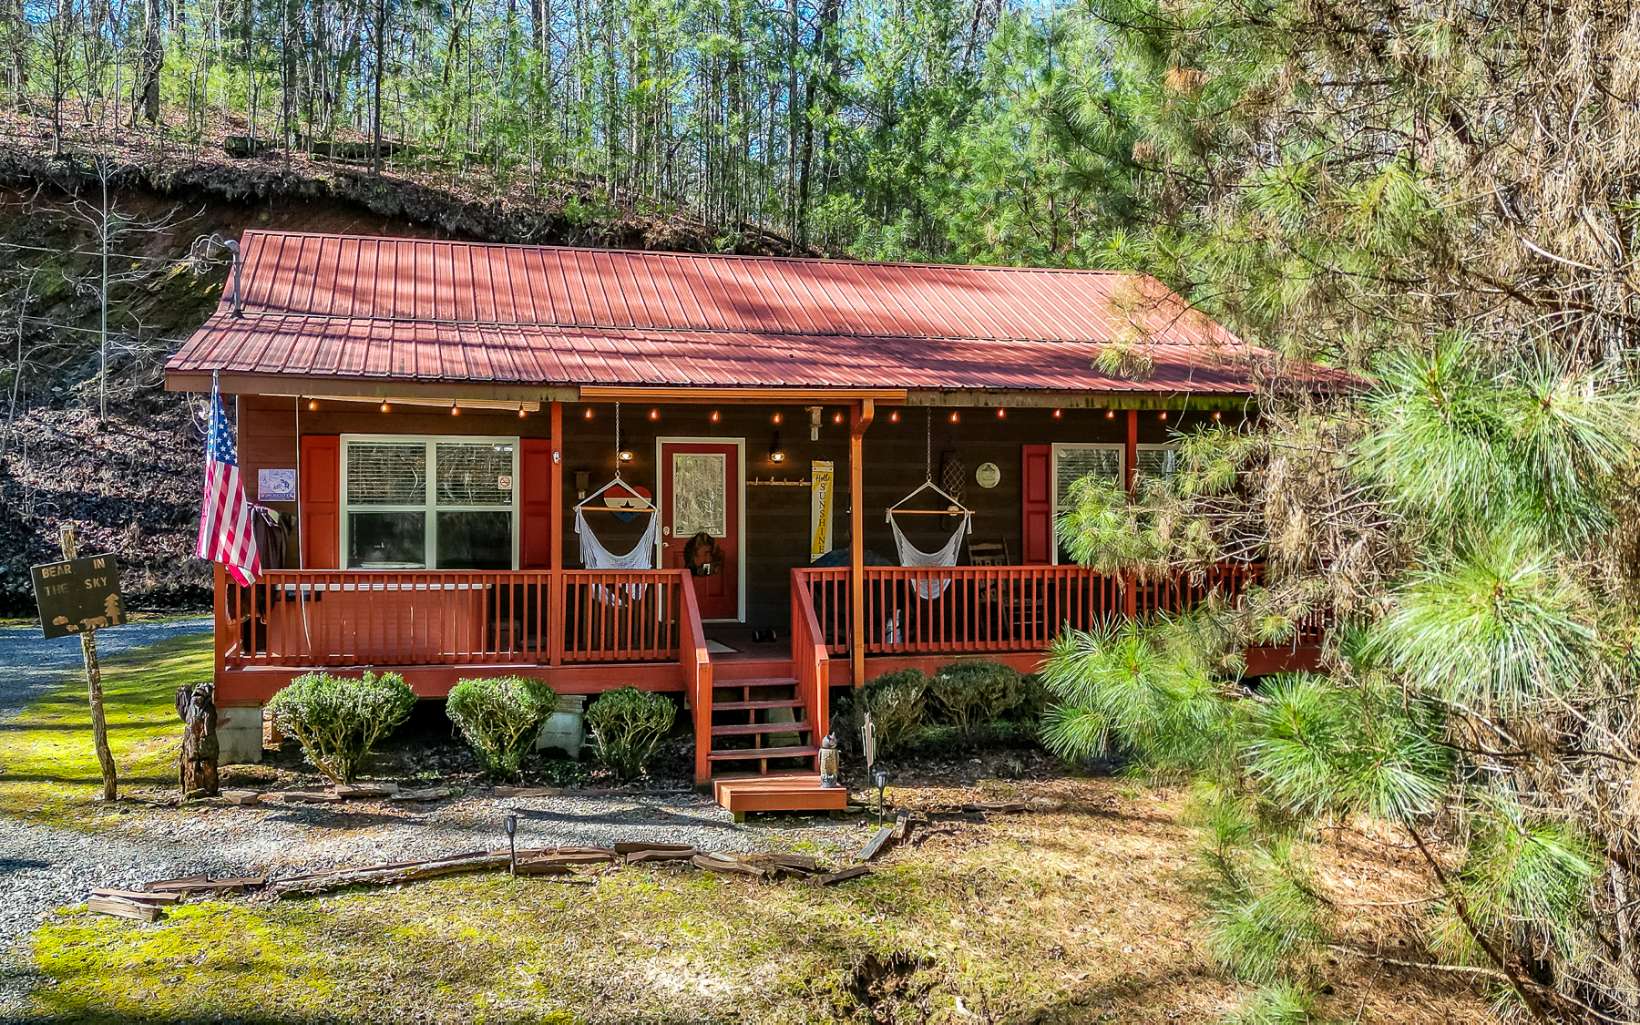 Welcome home to your turn-key cabin in the mountains. This fully furnished beauty has all of the comforts needed for a private escape. Enjoy your time indoors by one of the fireplaces, clear your mind in the jetted tub, or enjoy a meal in the open concept dining area with your friends or family. Head outside for more fun and relaxation on your own property. Bring some warmth to your winter nights watching wildlife in the front yard from the large hot tub under the covered porch. Wrap up the evening around the fire pit in the backyard. All of this without sacrificing modern necessities, such as fiber optic internet, to ensure a stress-free day working from your own cabin in the mountains. Get closer to nature within the gates of the Coosawattee River Resort with catch and release fishing, your pick of various heated pools, fitness and spa centers, 18 hole miniature golf course, tennis, RV camping, game room, event spaces, basketball courts, and more.